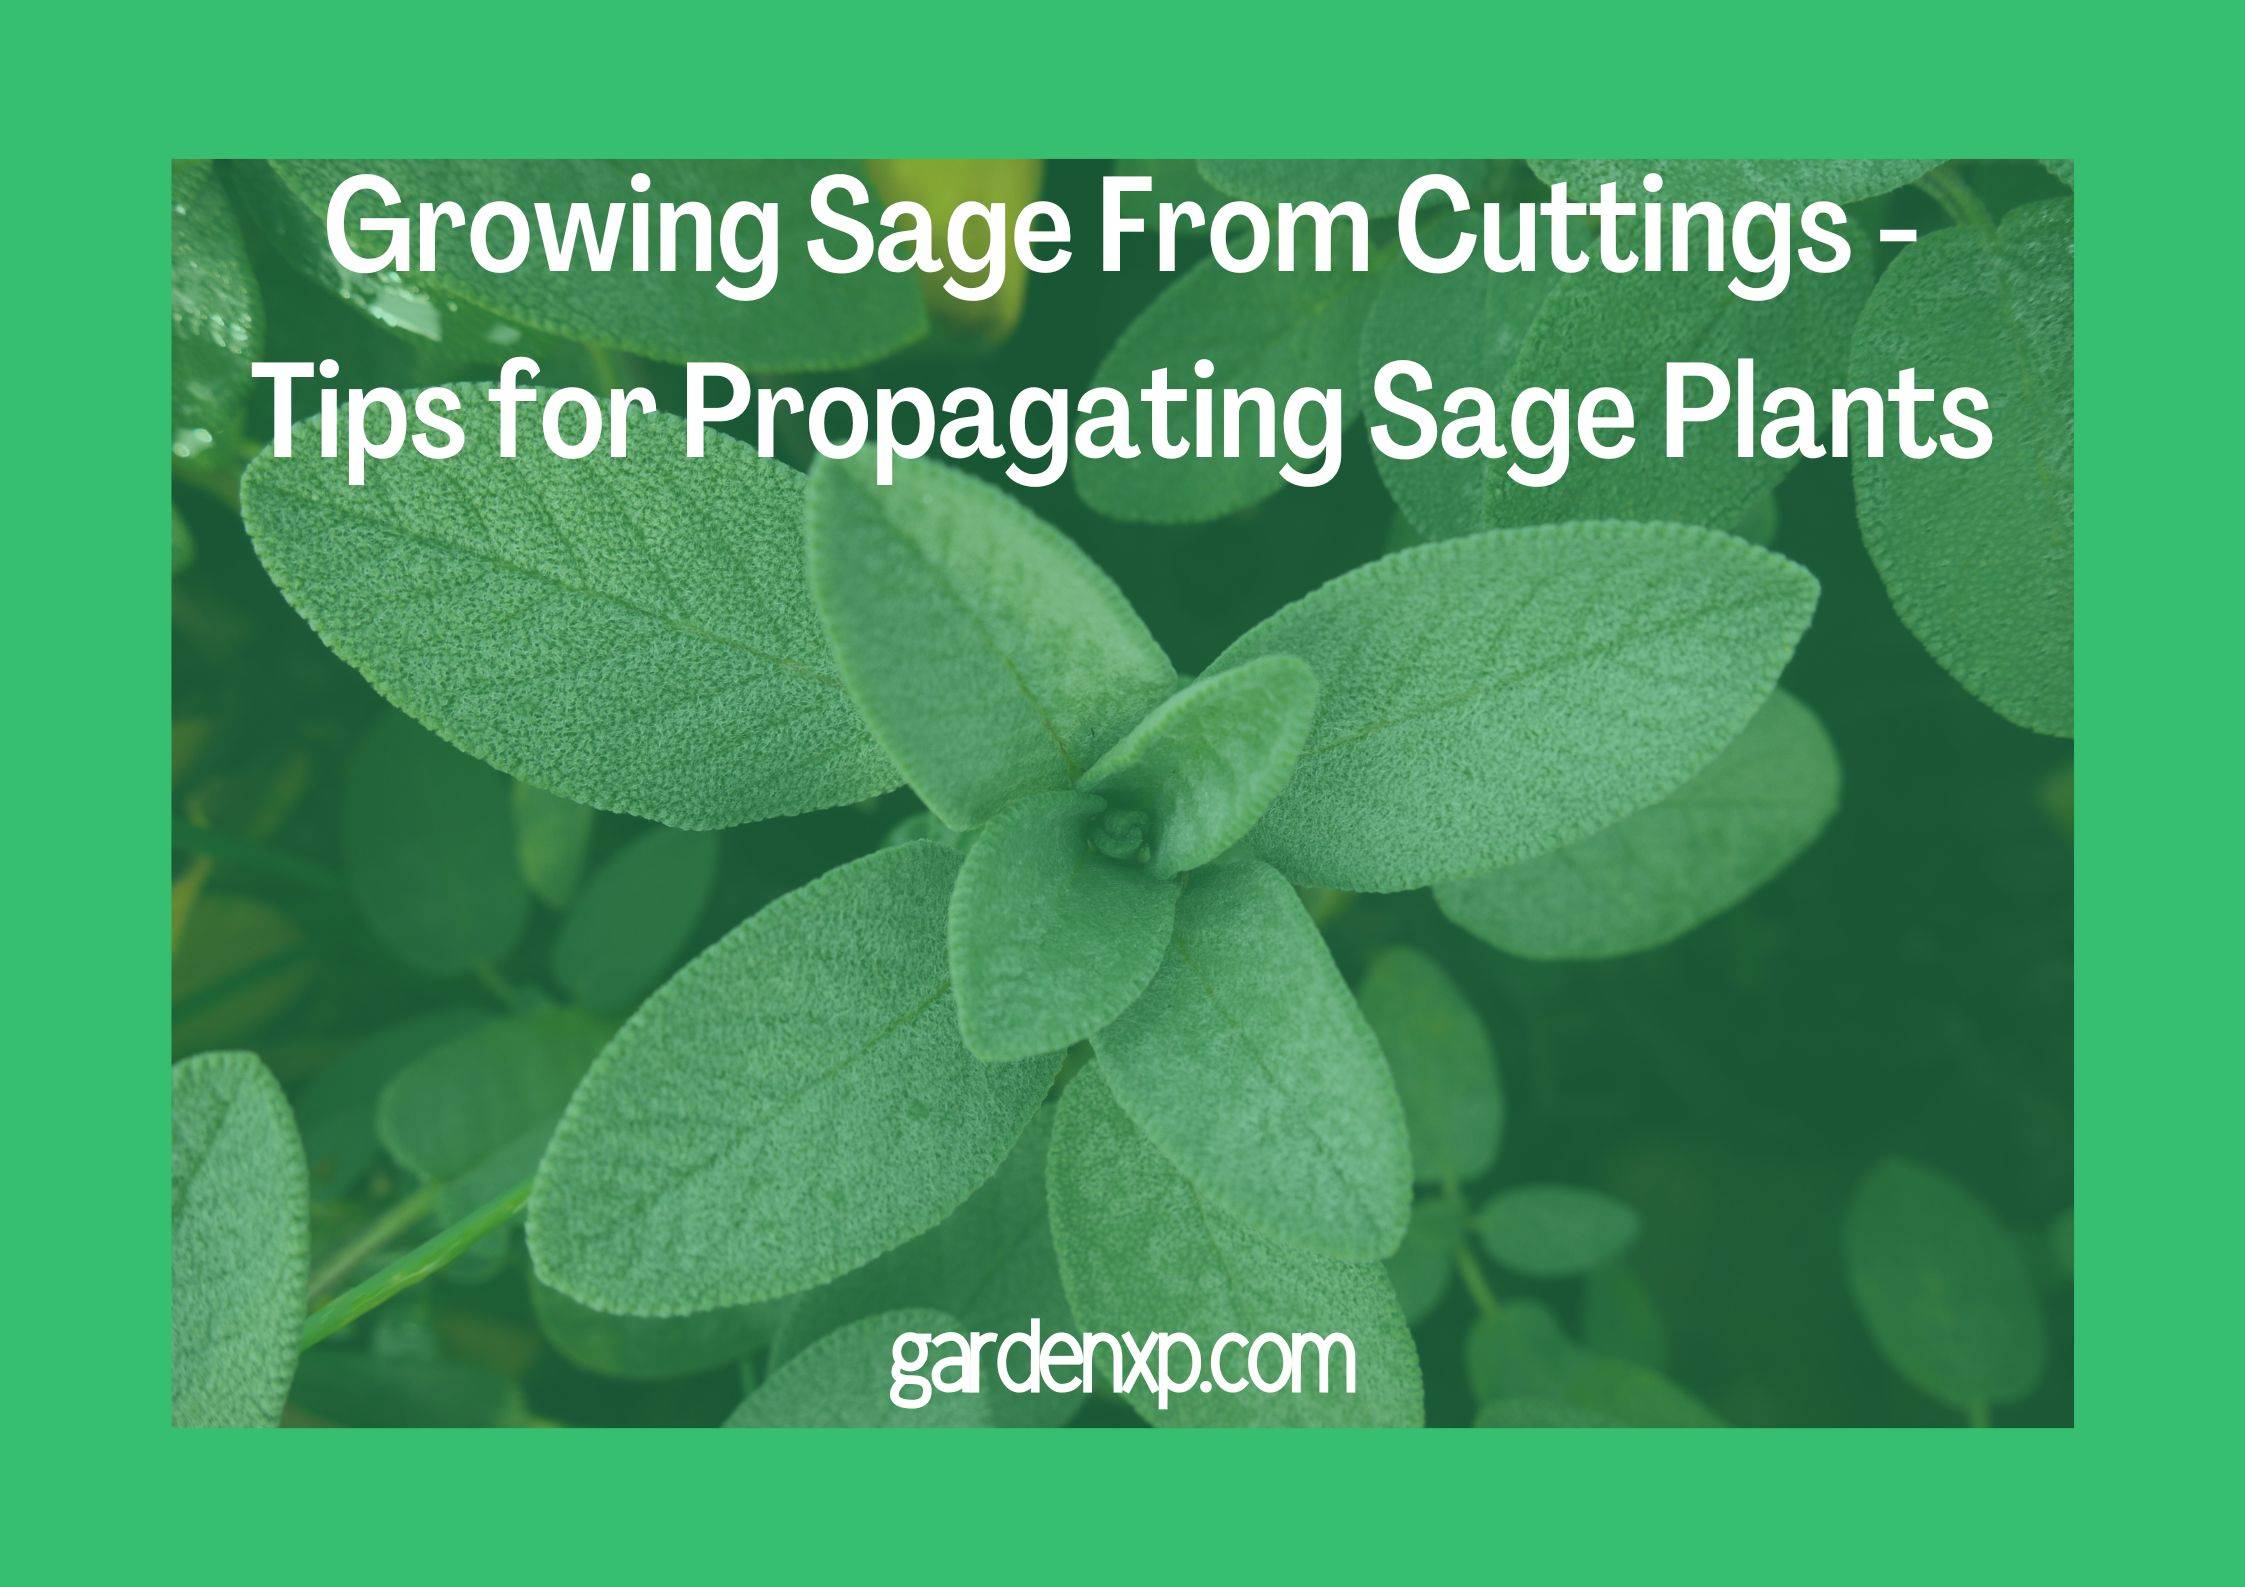 Growing Sage From Cuttings - Tips for Propagating Sage Plants